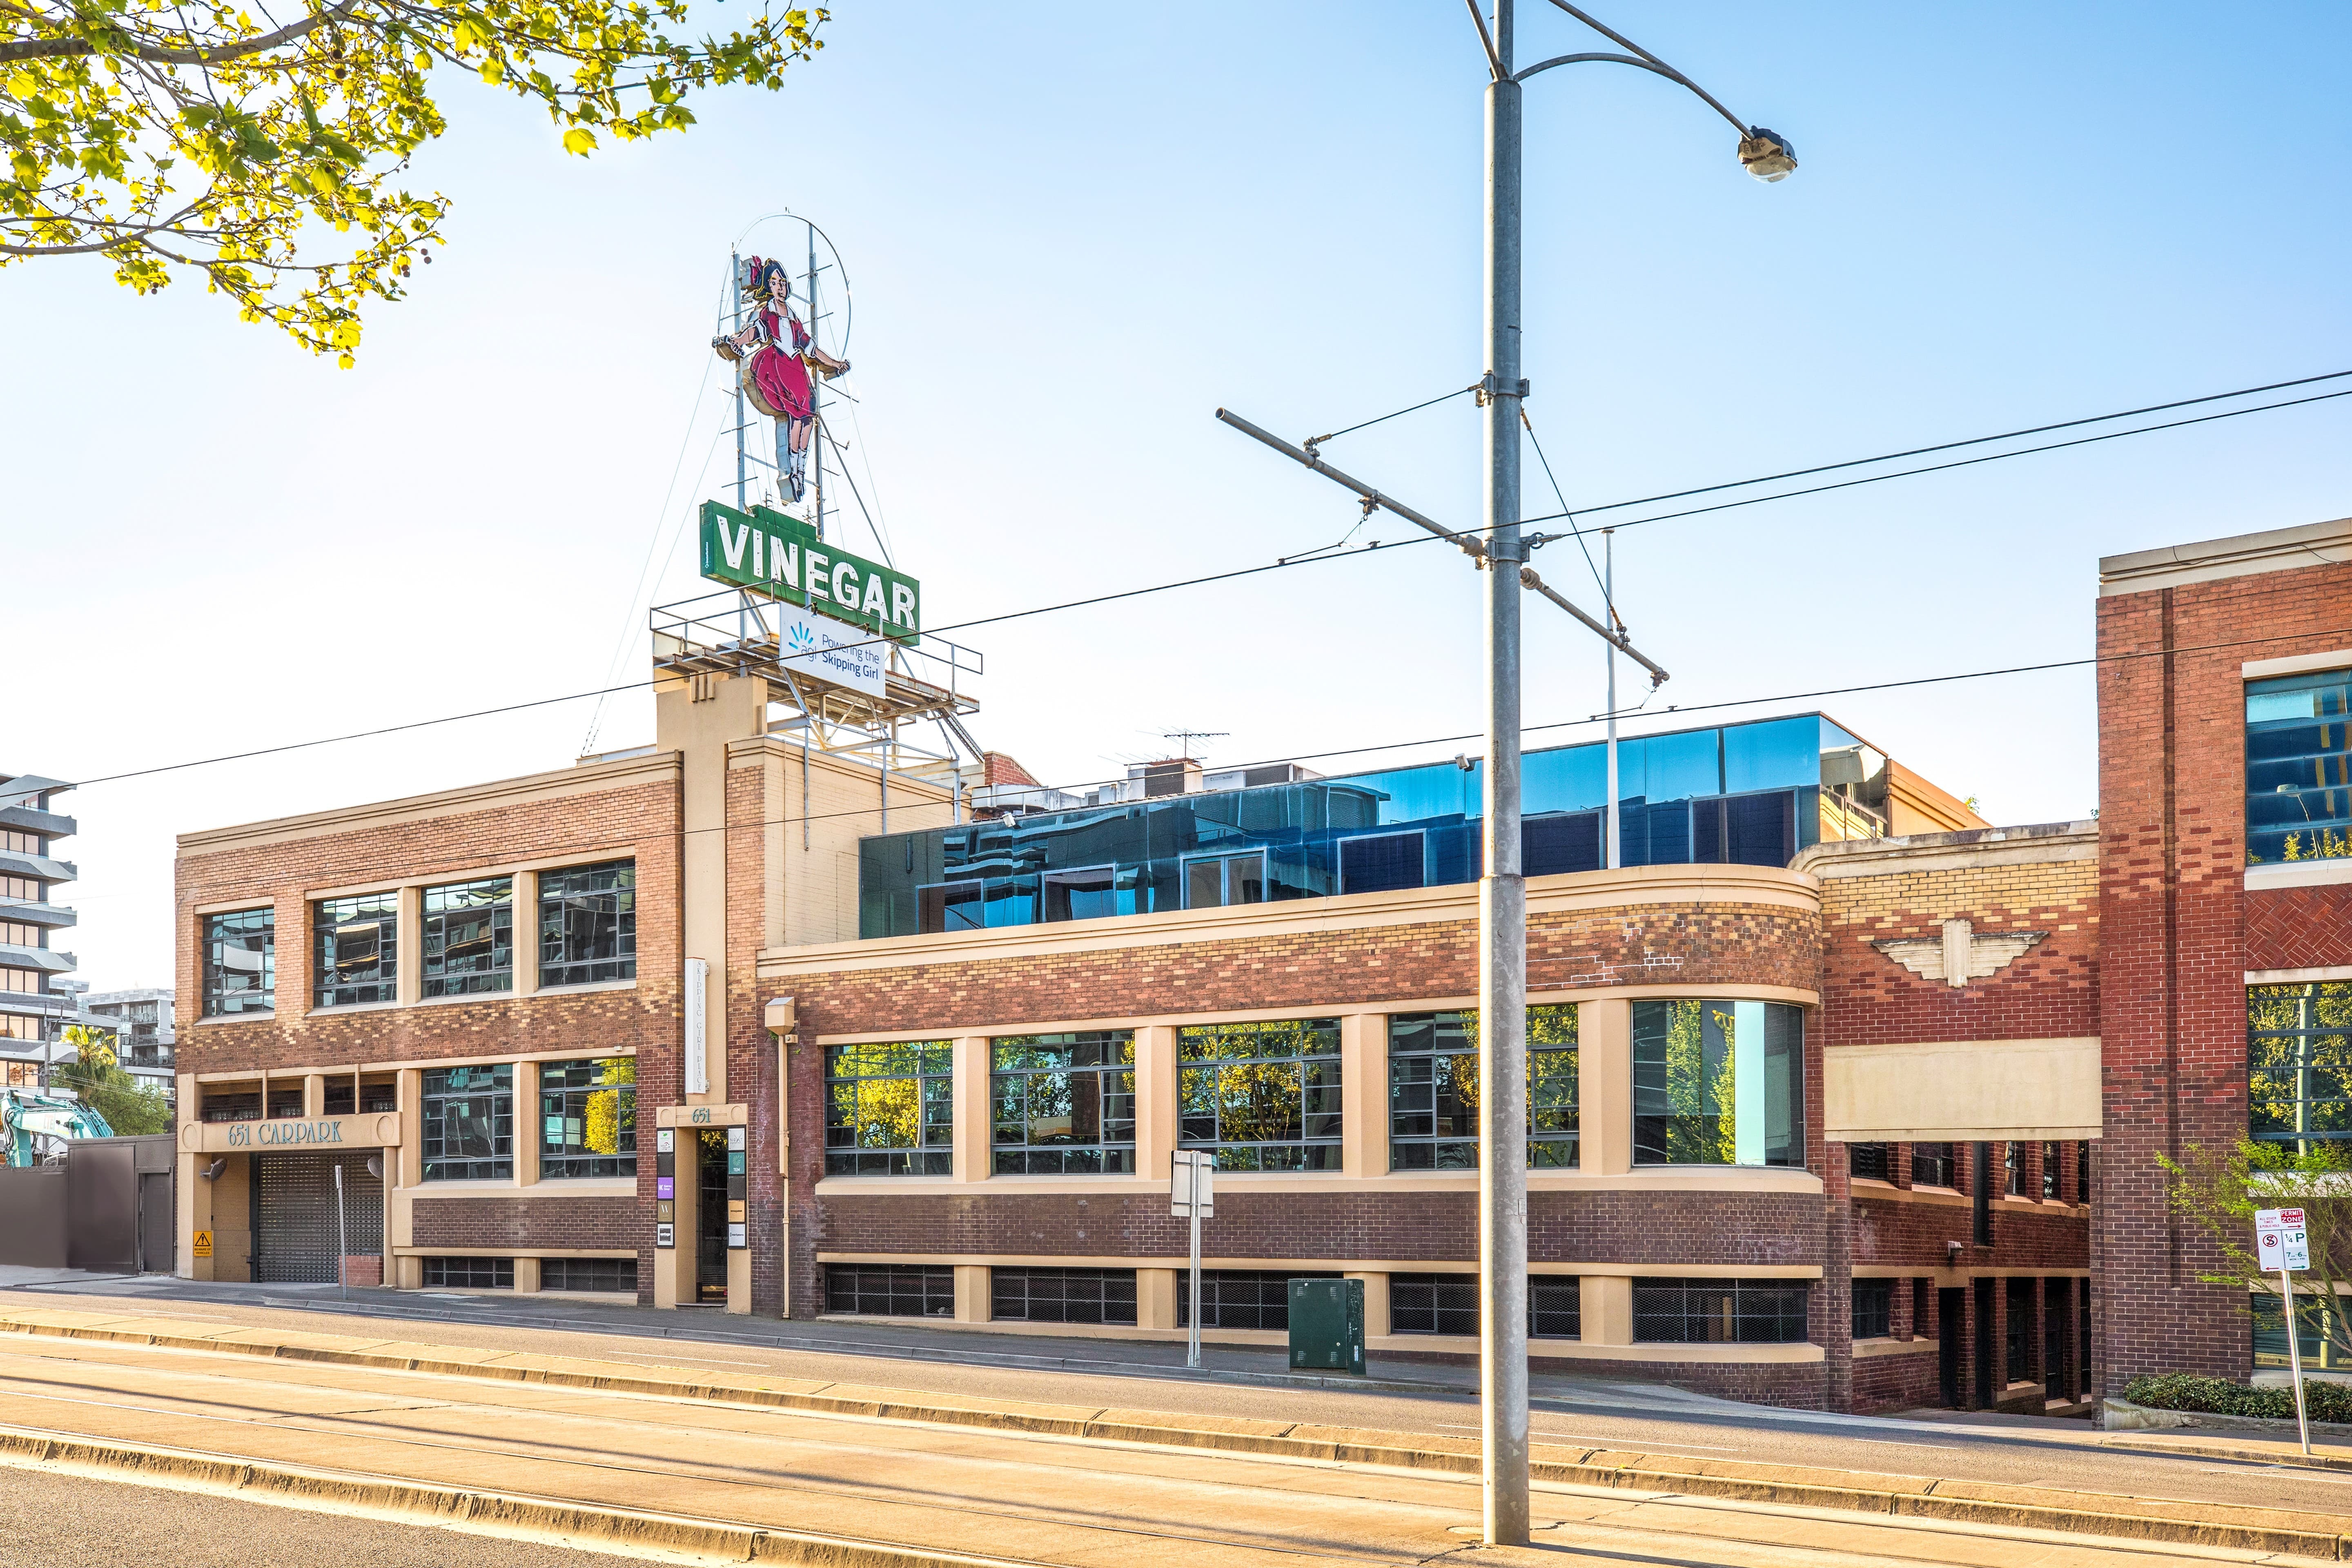 Melbourne’s iconic “Skipping Girl” building sold in off-market transaction